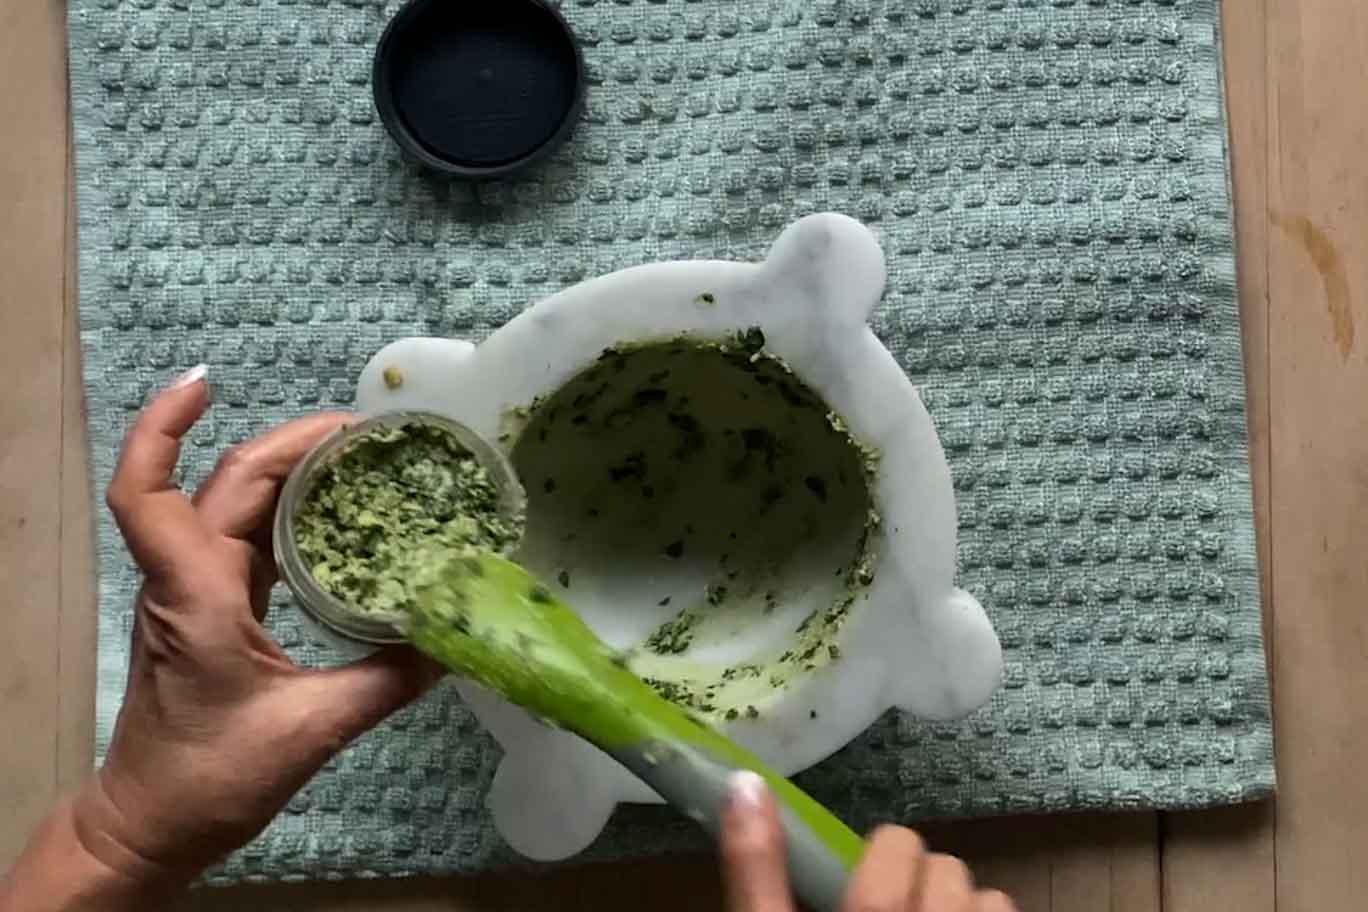 Using a silicone spatula to remove pesto from mortar and place into a small glass jar